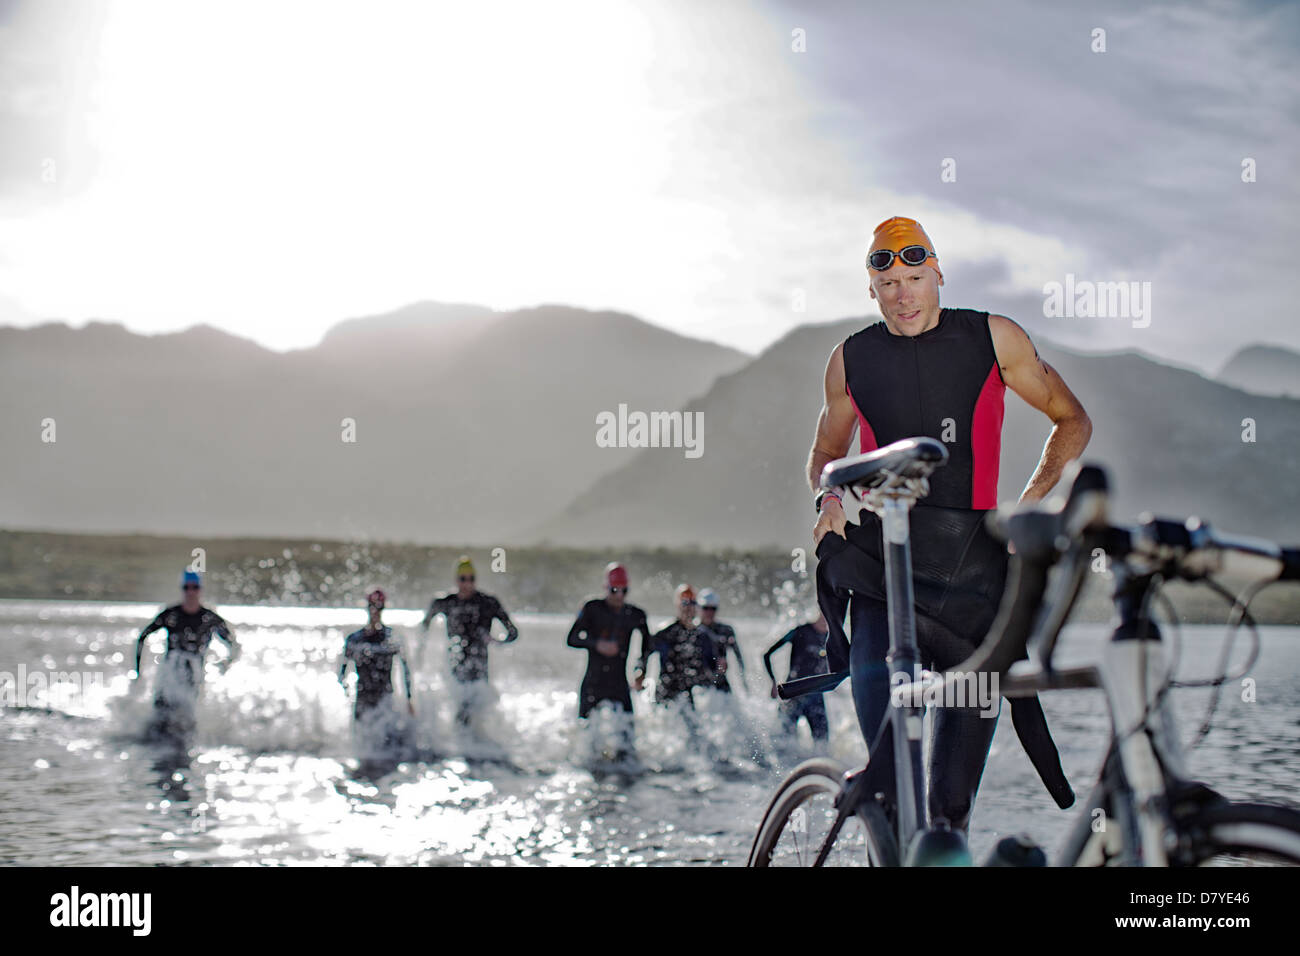 Triathletes emerging from water Banque D'Images